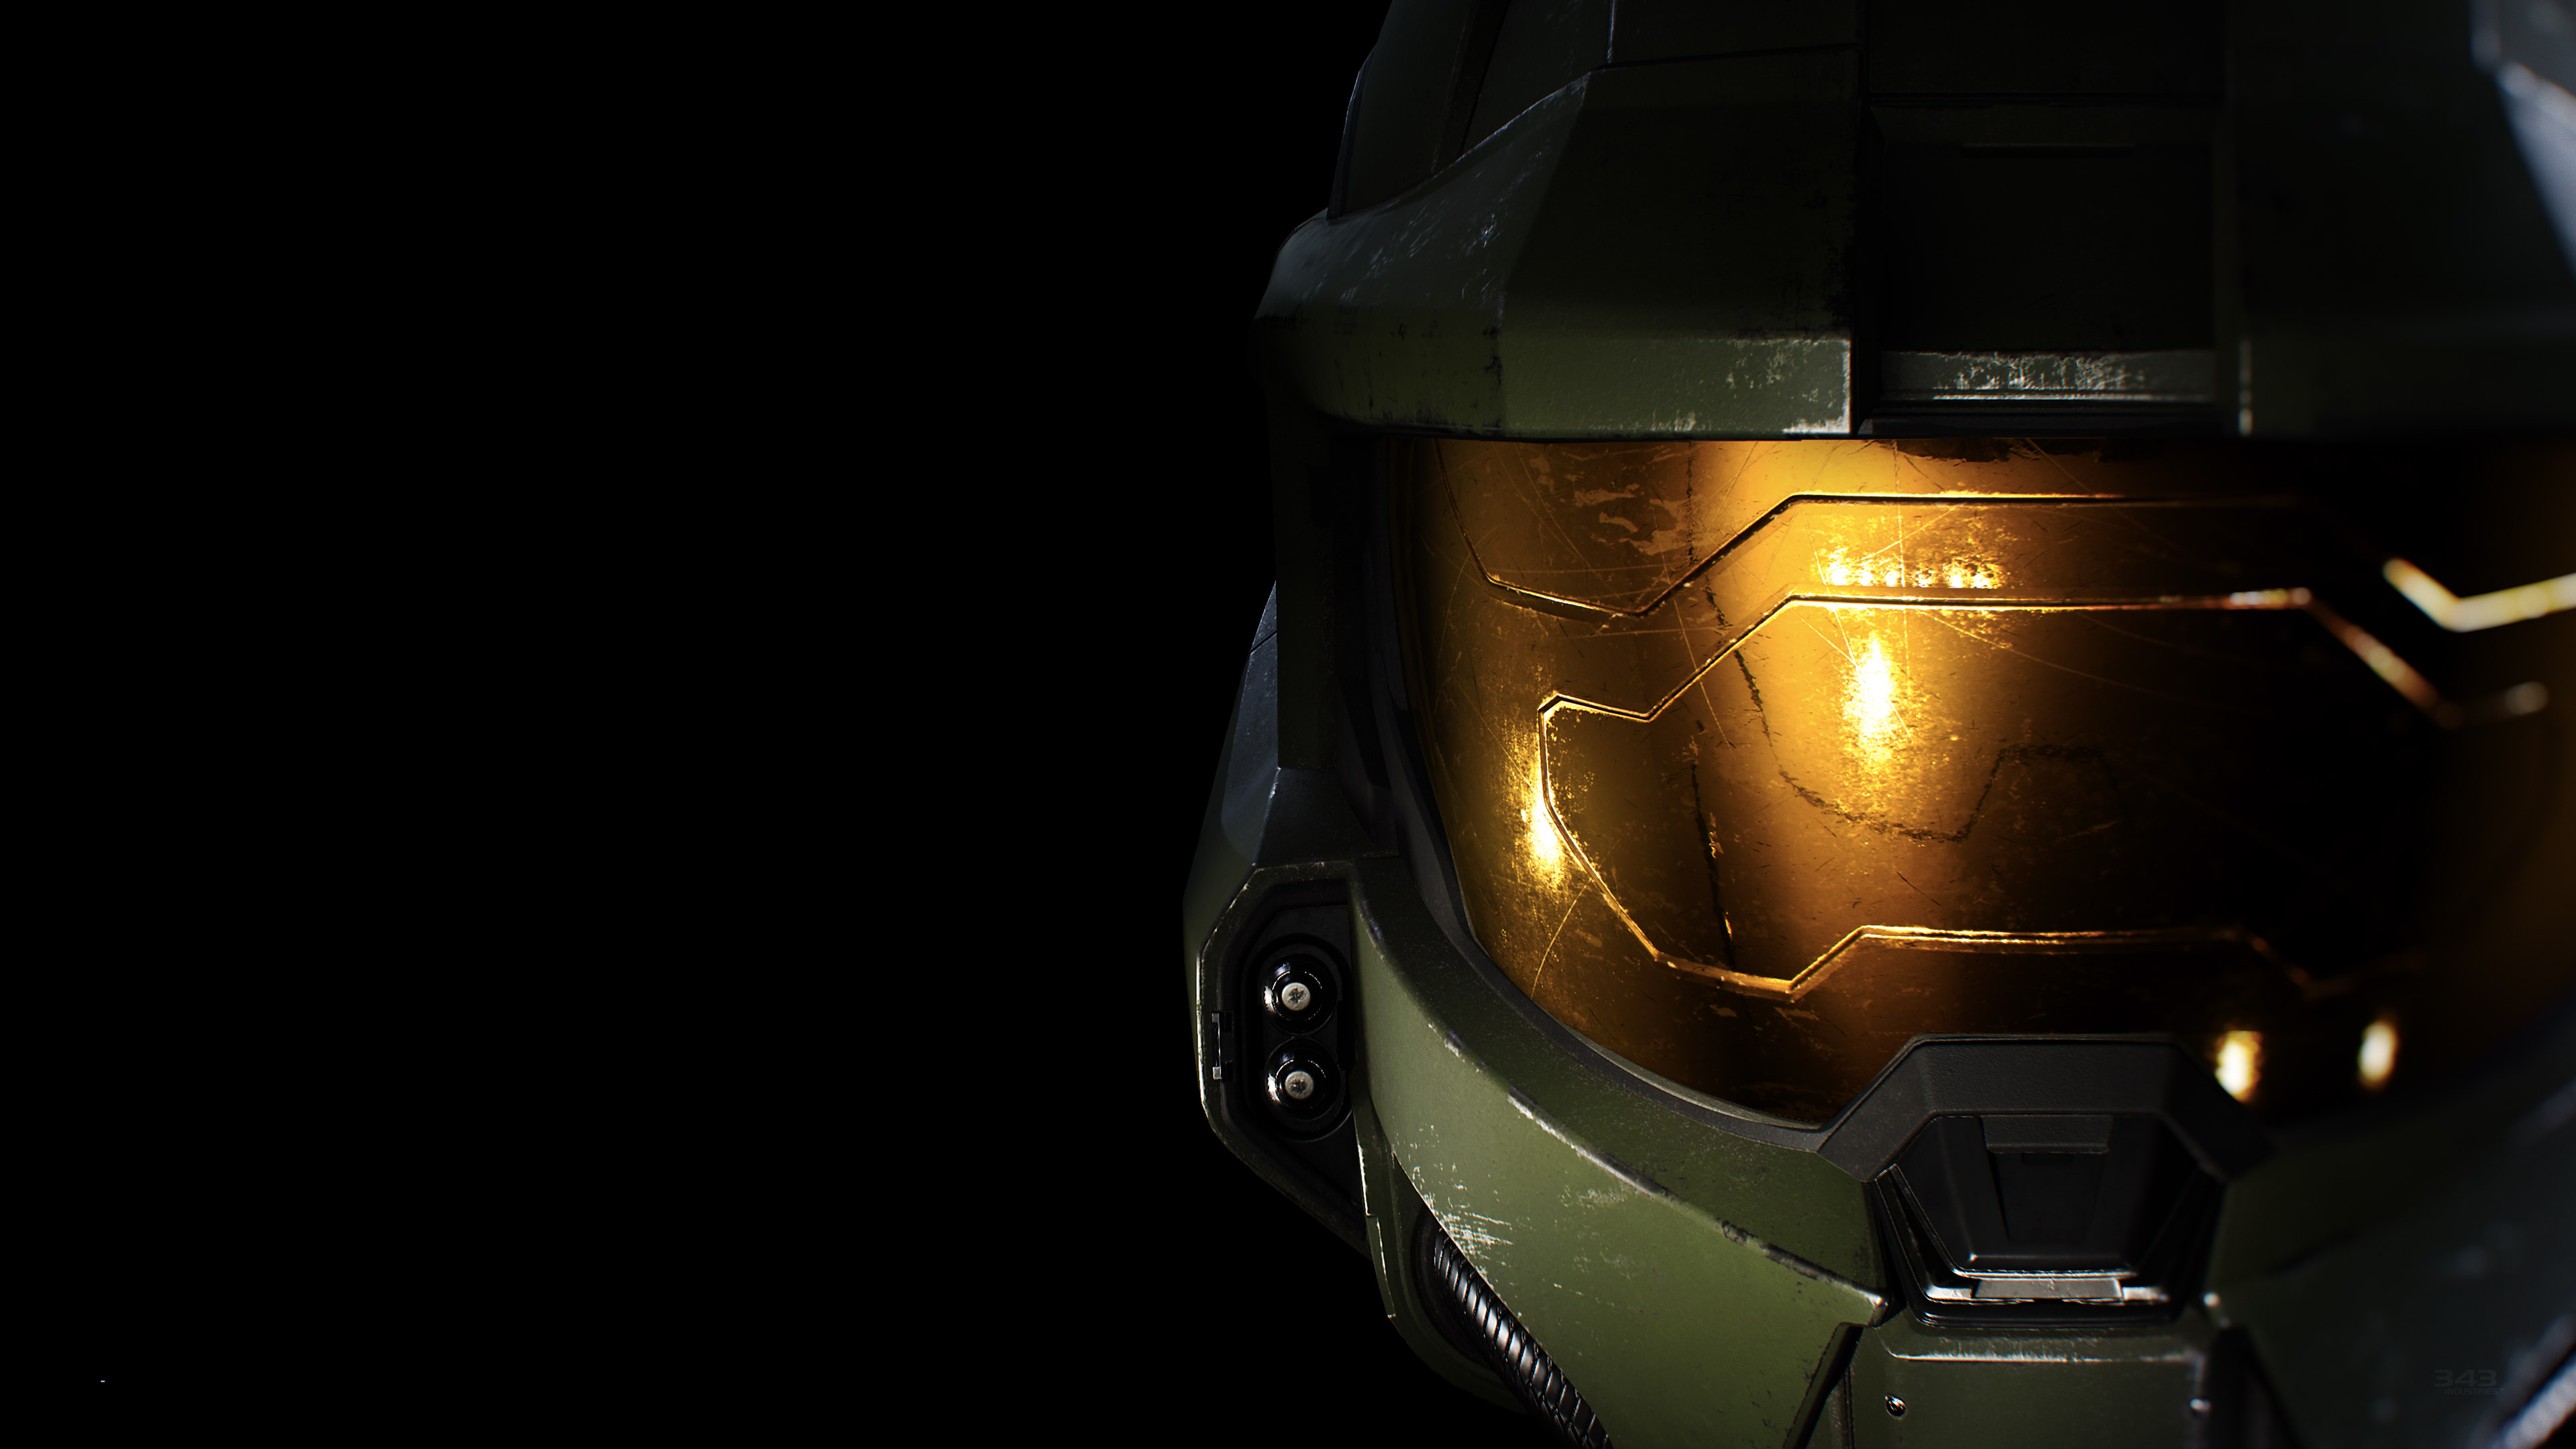 A render of Master Chief’s helmet from Halo Infinite